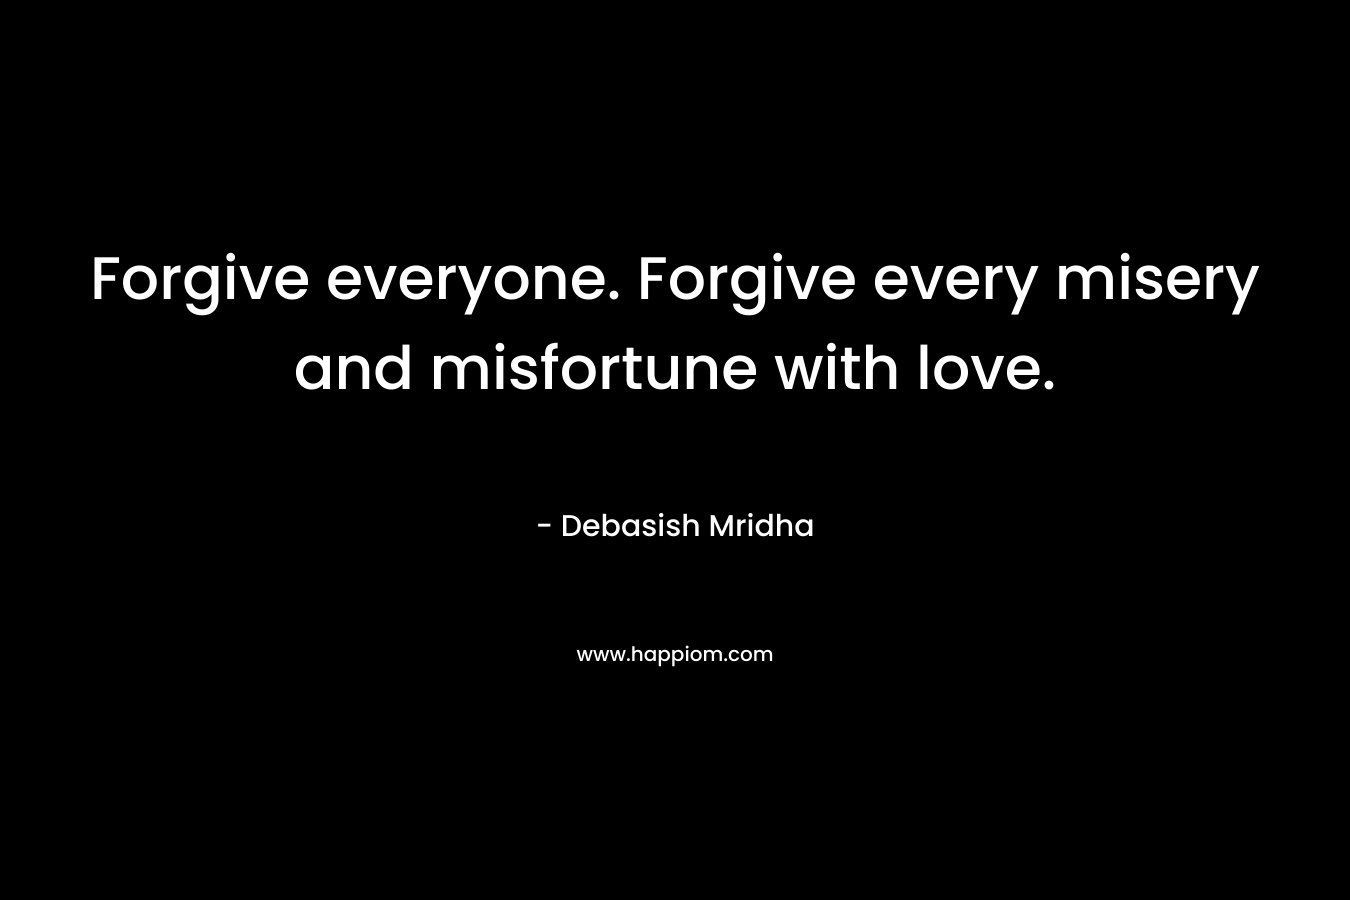 Forgive everyone. Forgive every misery and misfortune with love.